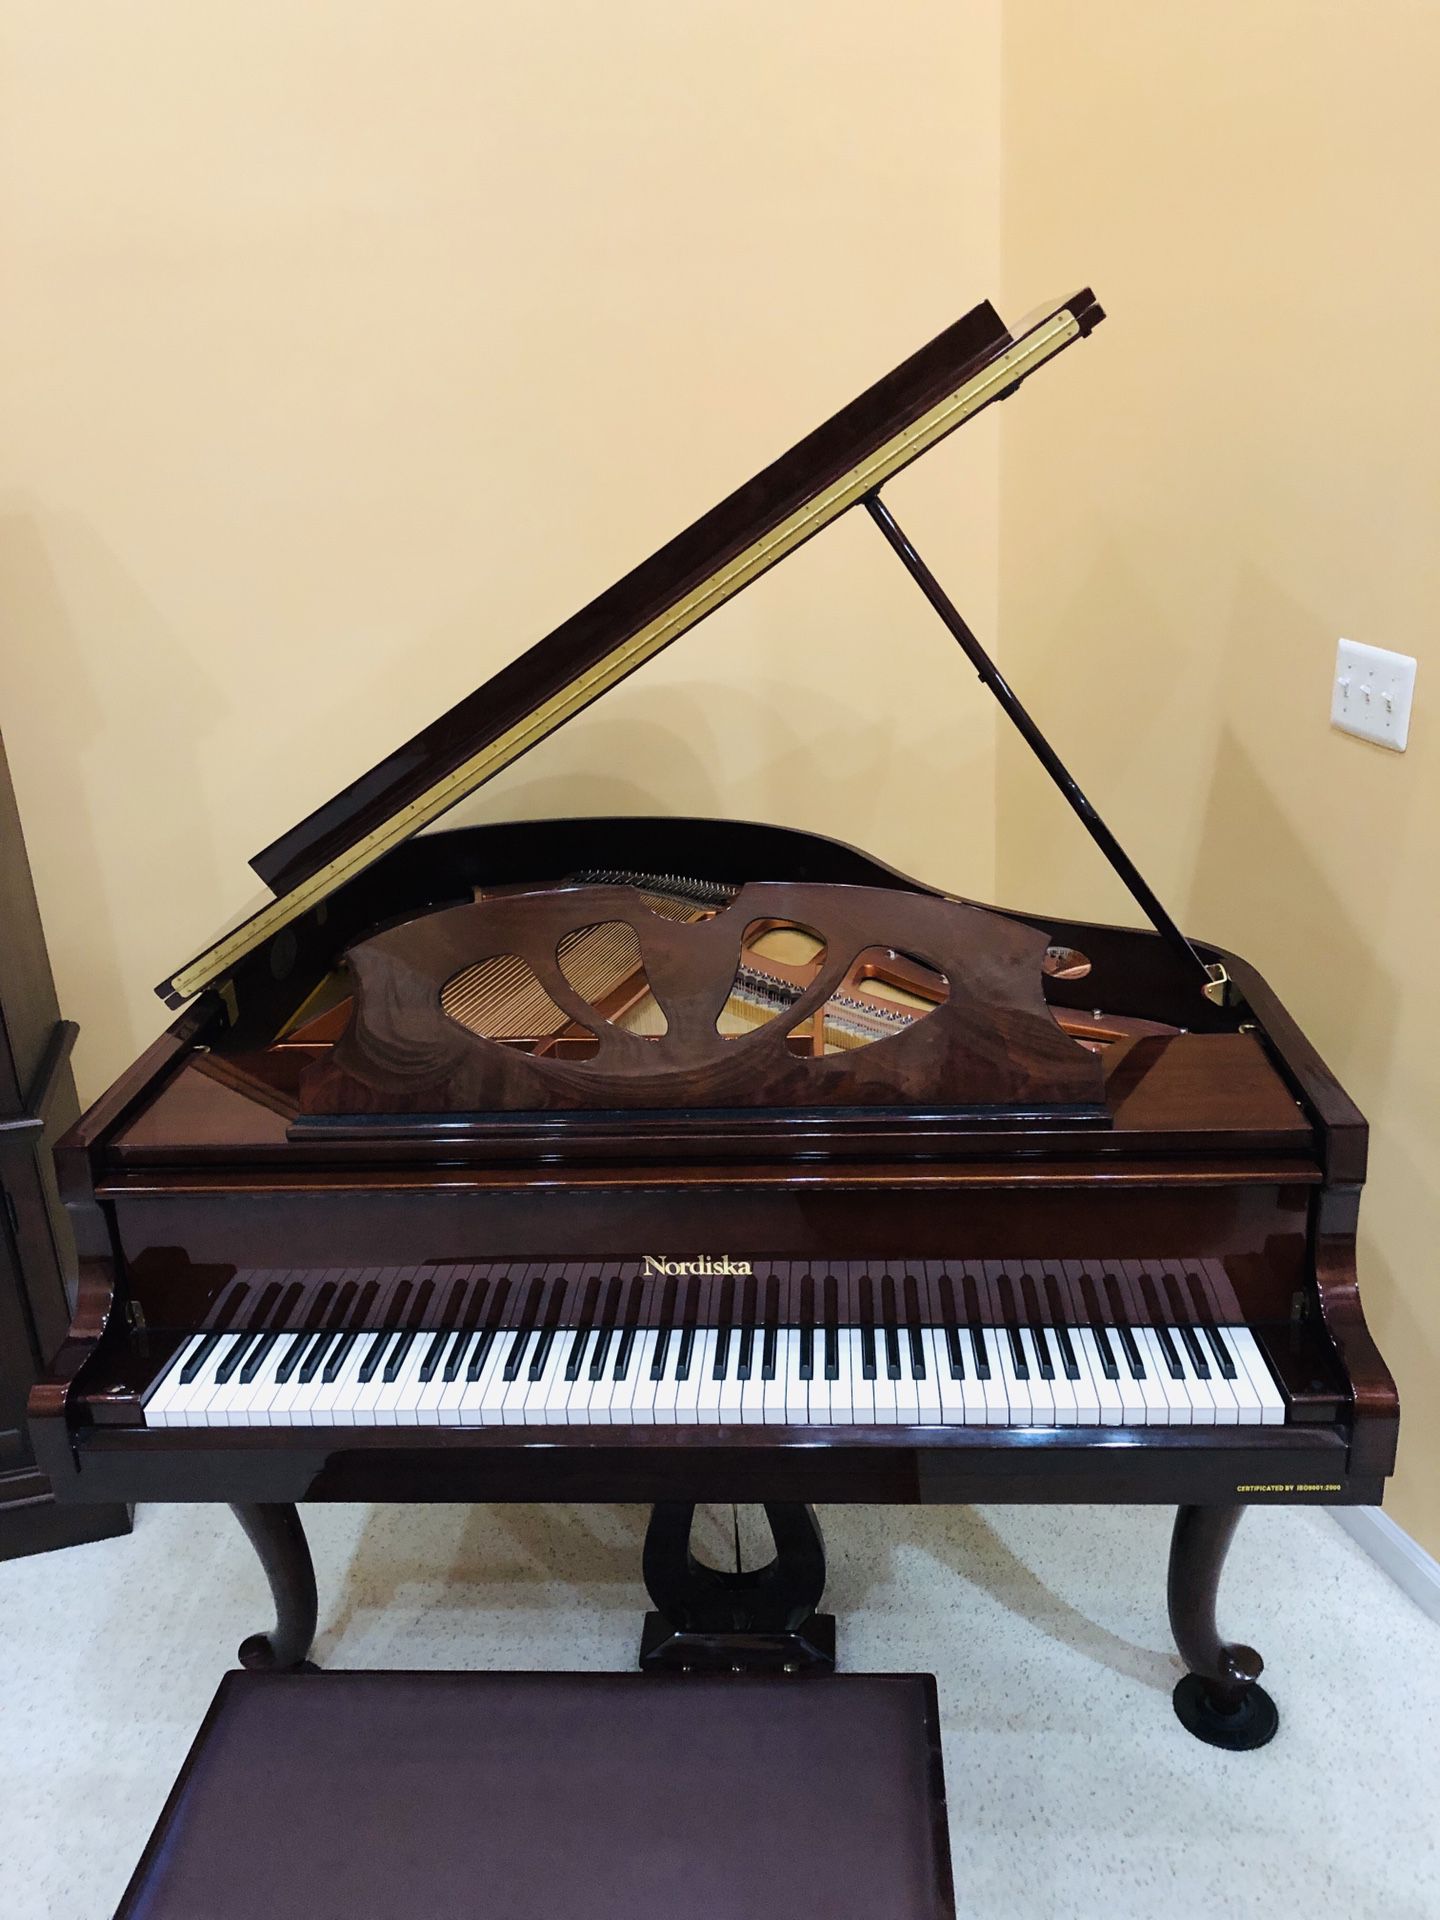 Nordiska Grand Piano for sale in excellent condition. Very motivated to sell